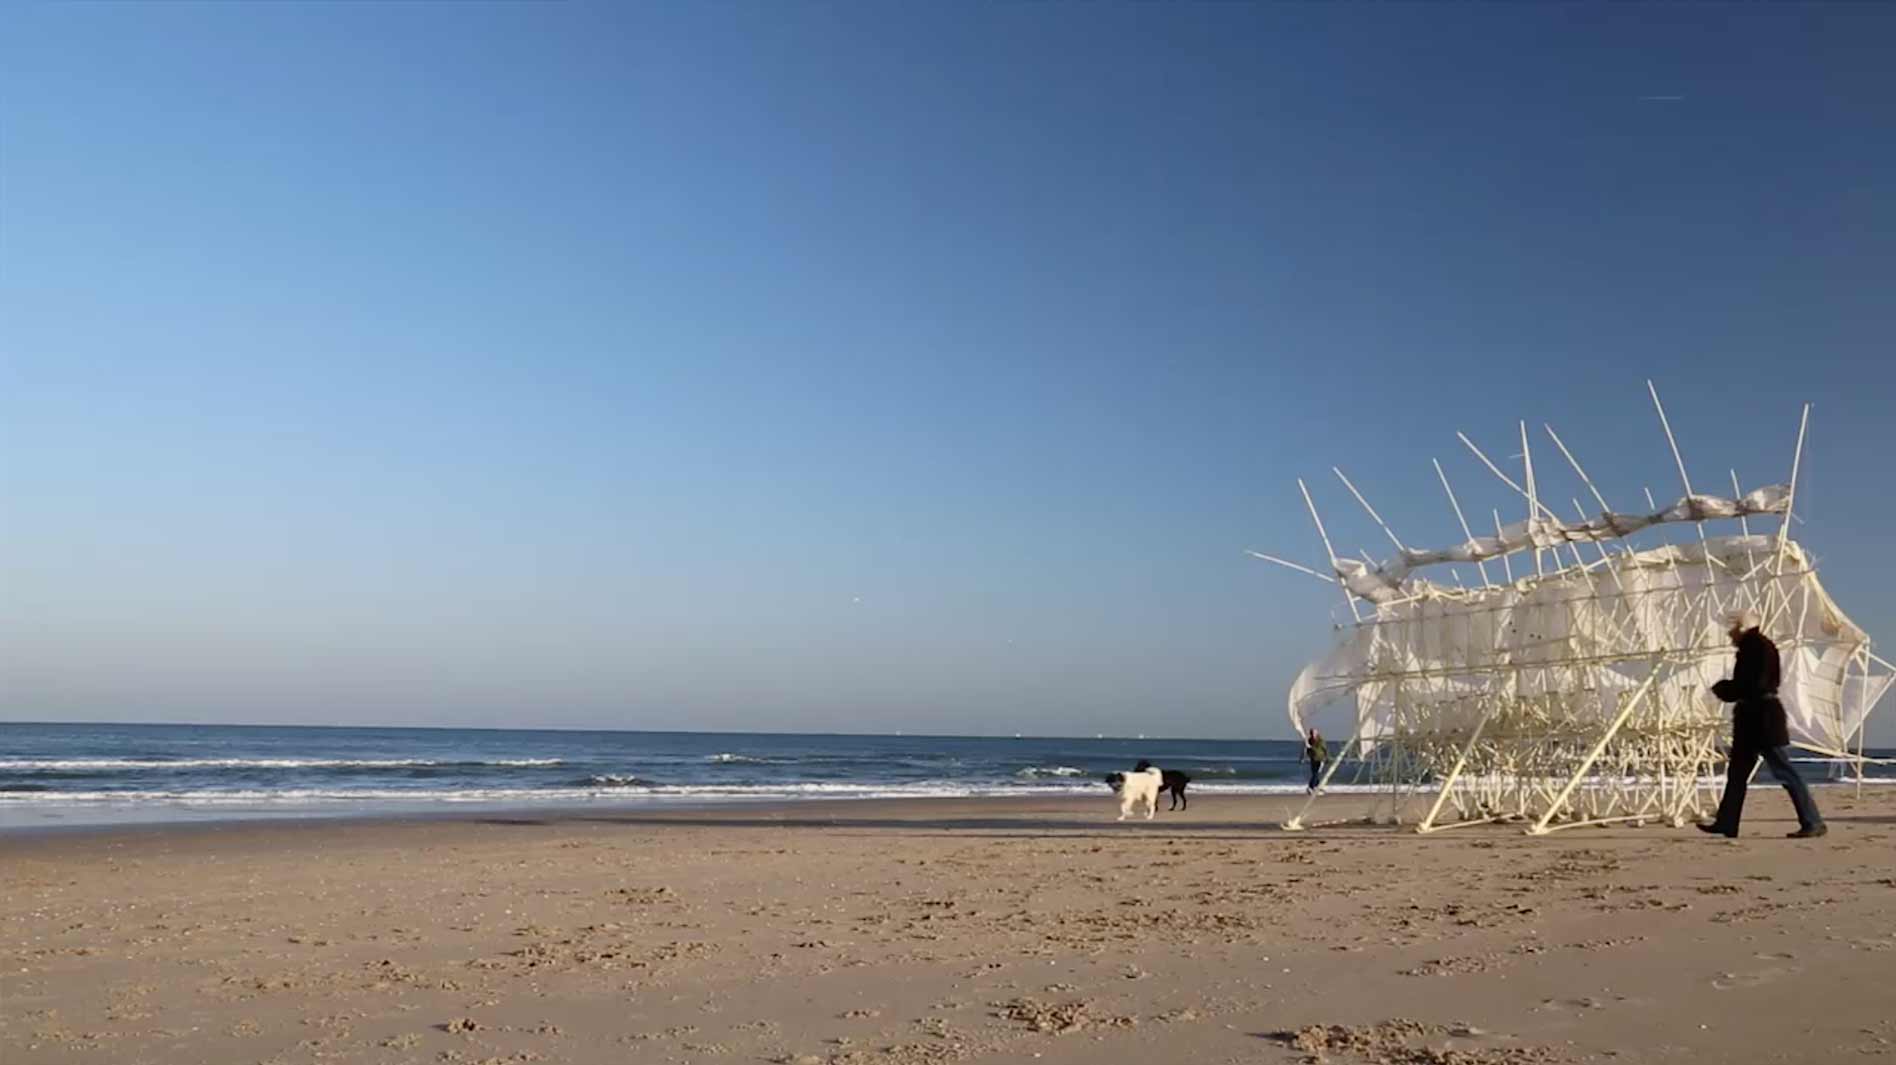 Theo on the beach with a Strandbeest